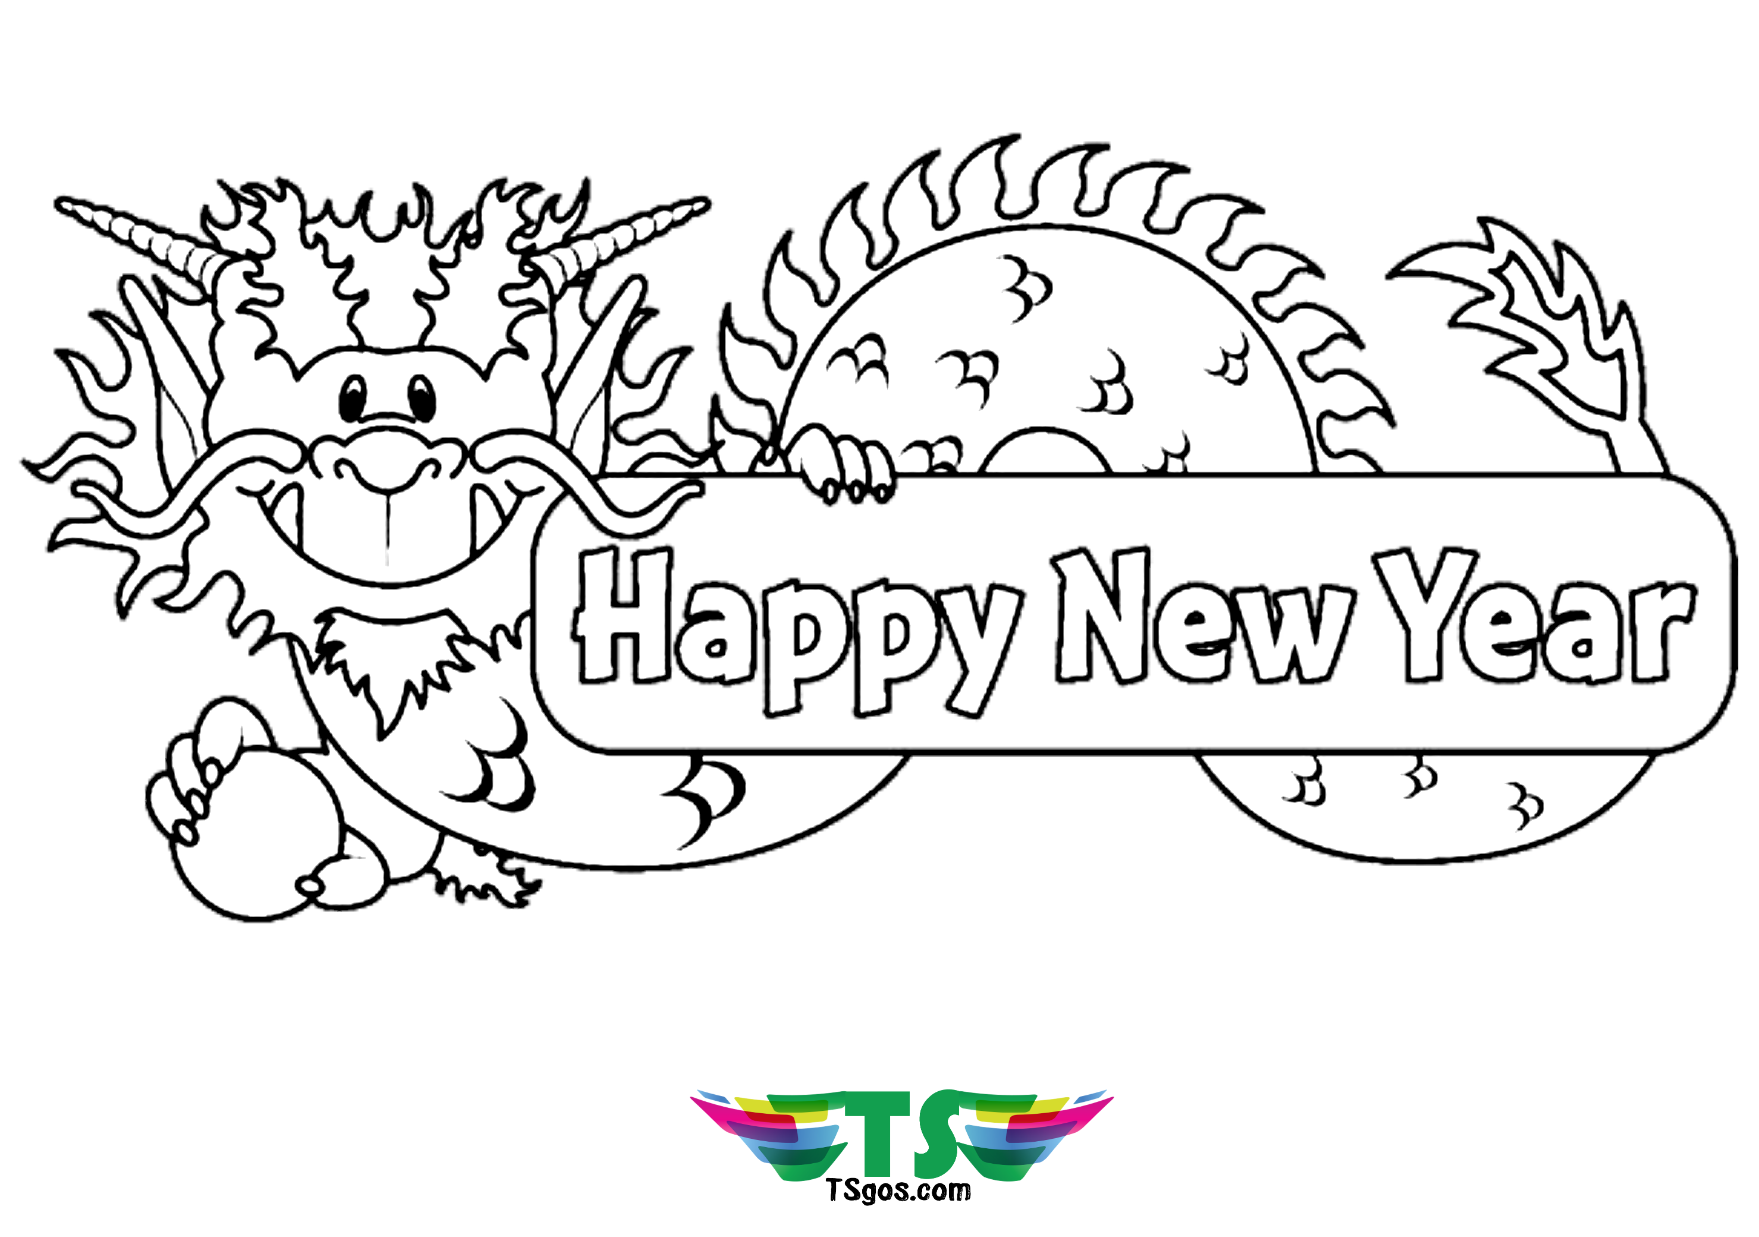 Chinese new year coloring pages for kindergarten   TSgos.com ...